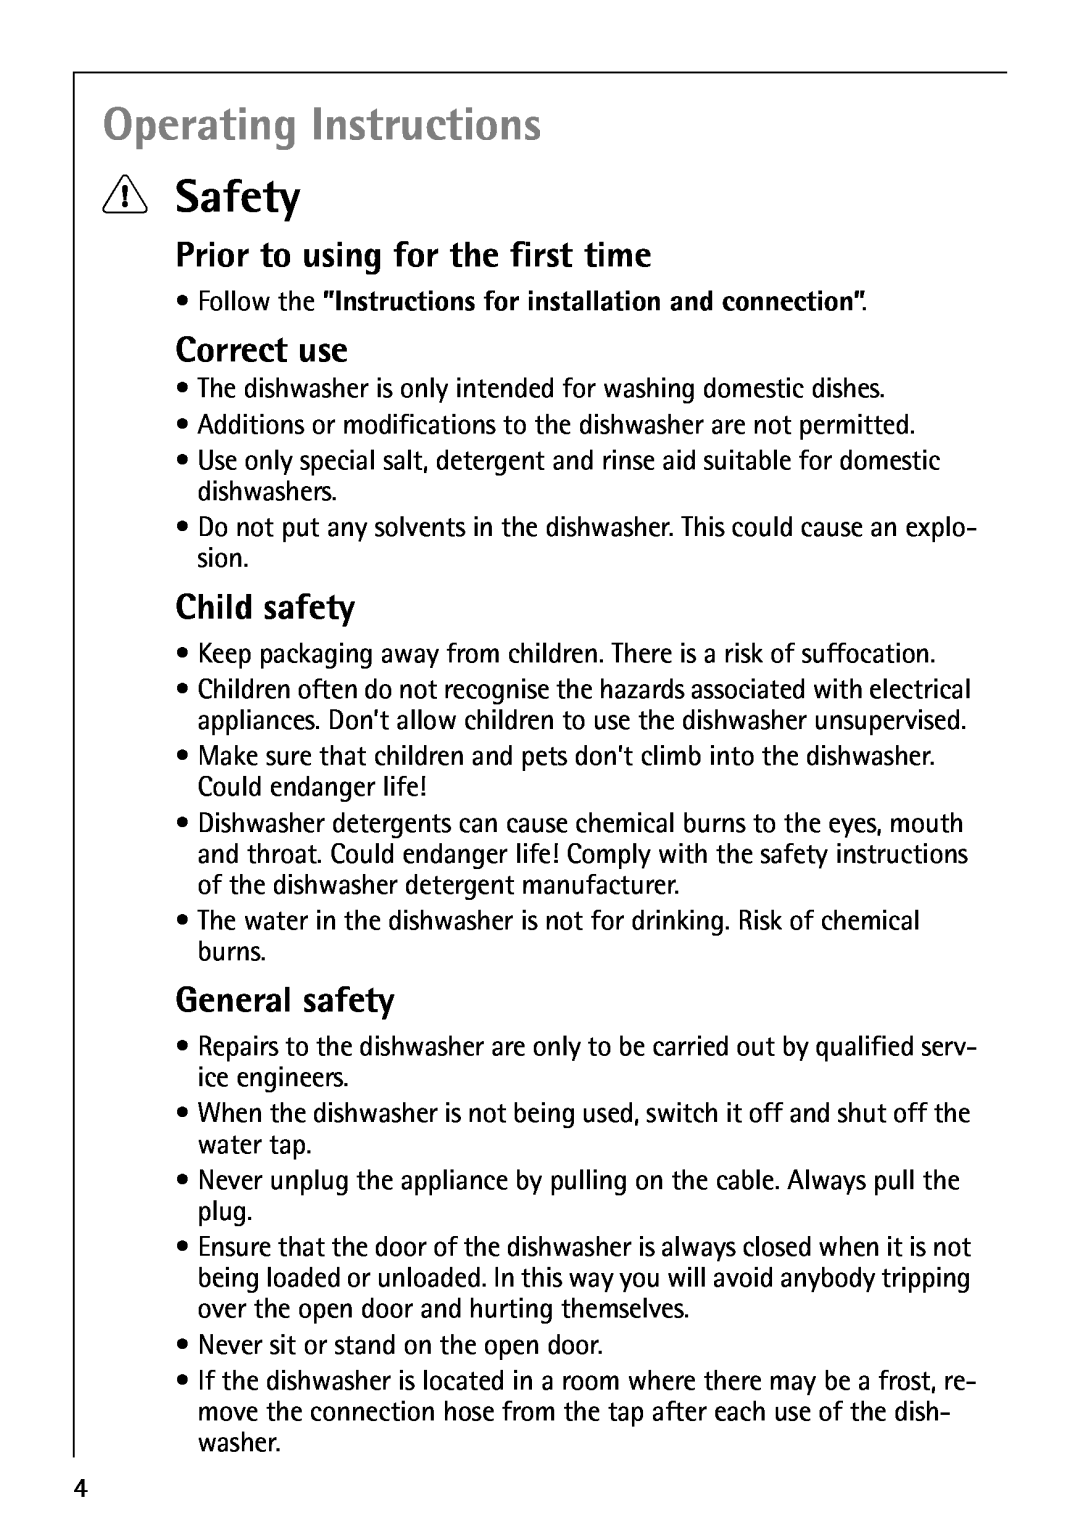 AEG 40860 Operating Instructions, 1Safety, Prior to using for the first time, Correct use, Child safety, General safety 